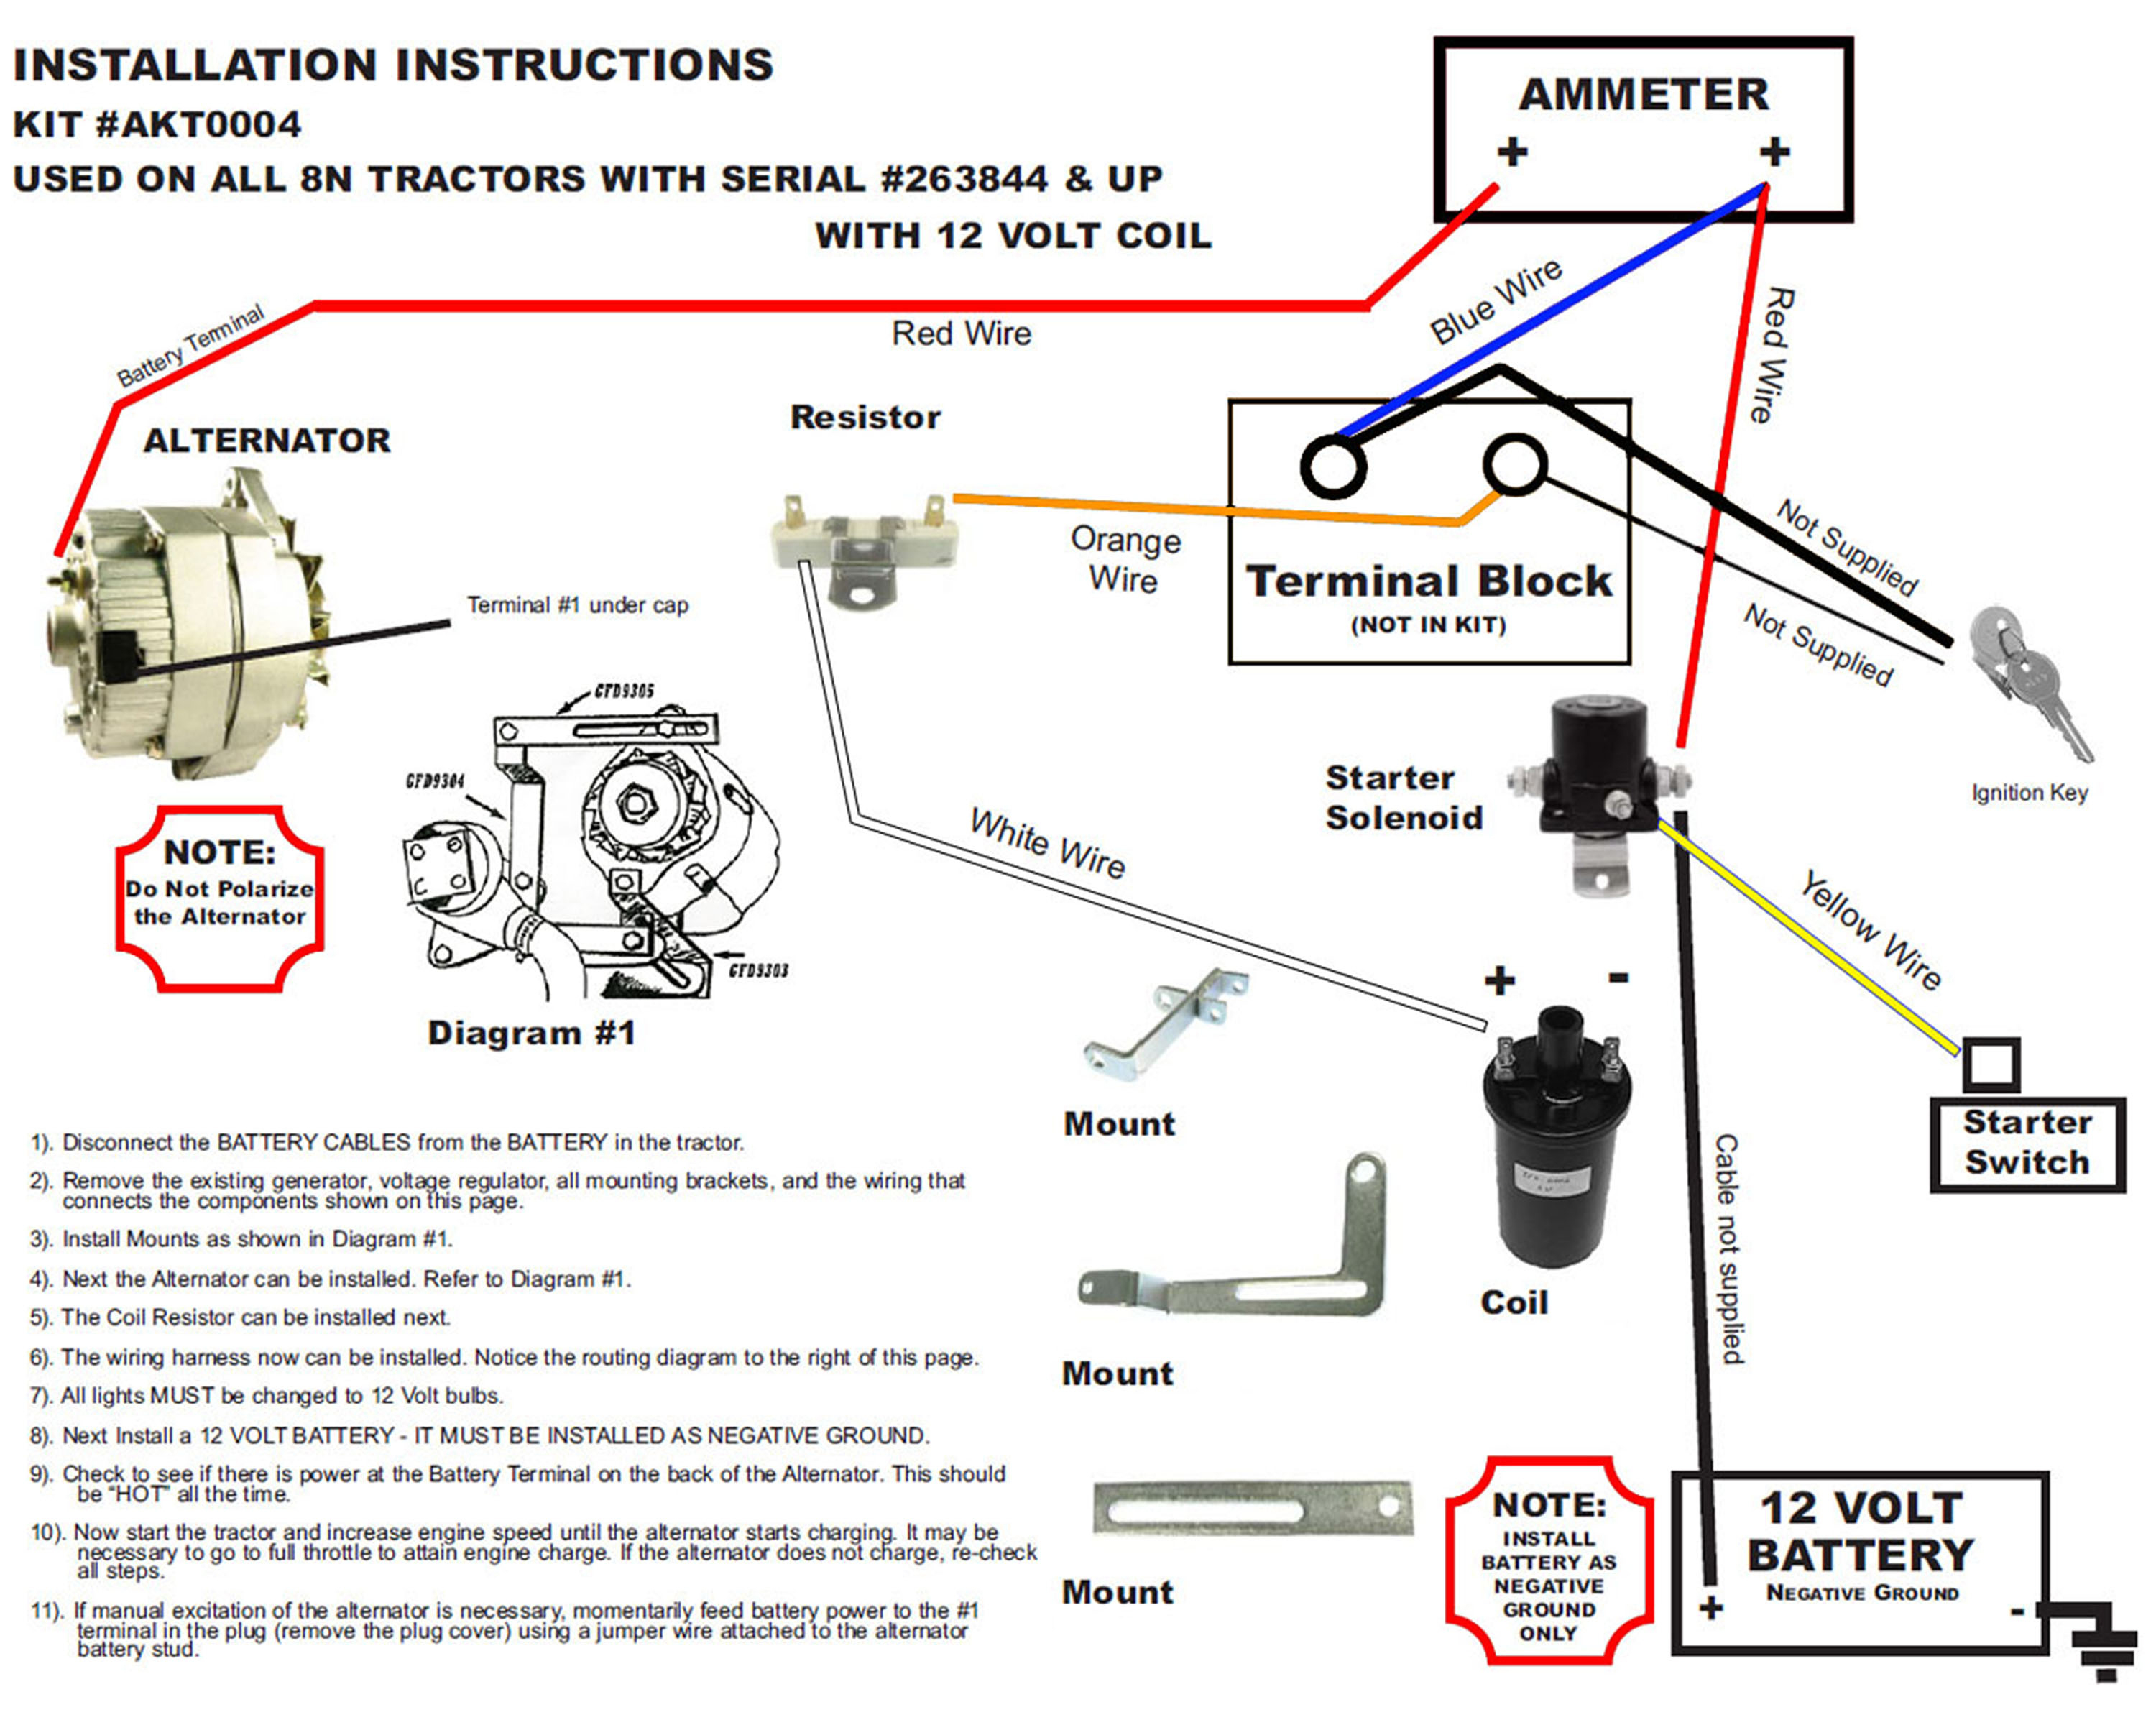 12 Volt Wiring Diagram Ford 8N Tractor 1 Wire Alternator - Wiring - Ford 8N 12 Volt Conversion Wiring Diagram